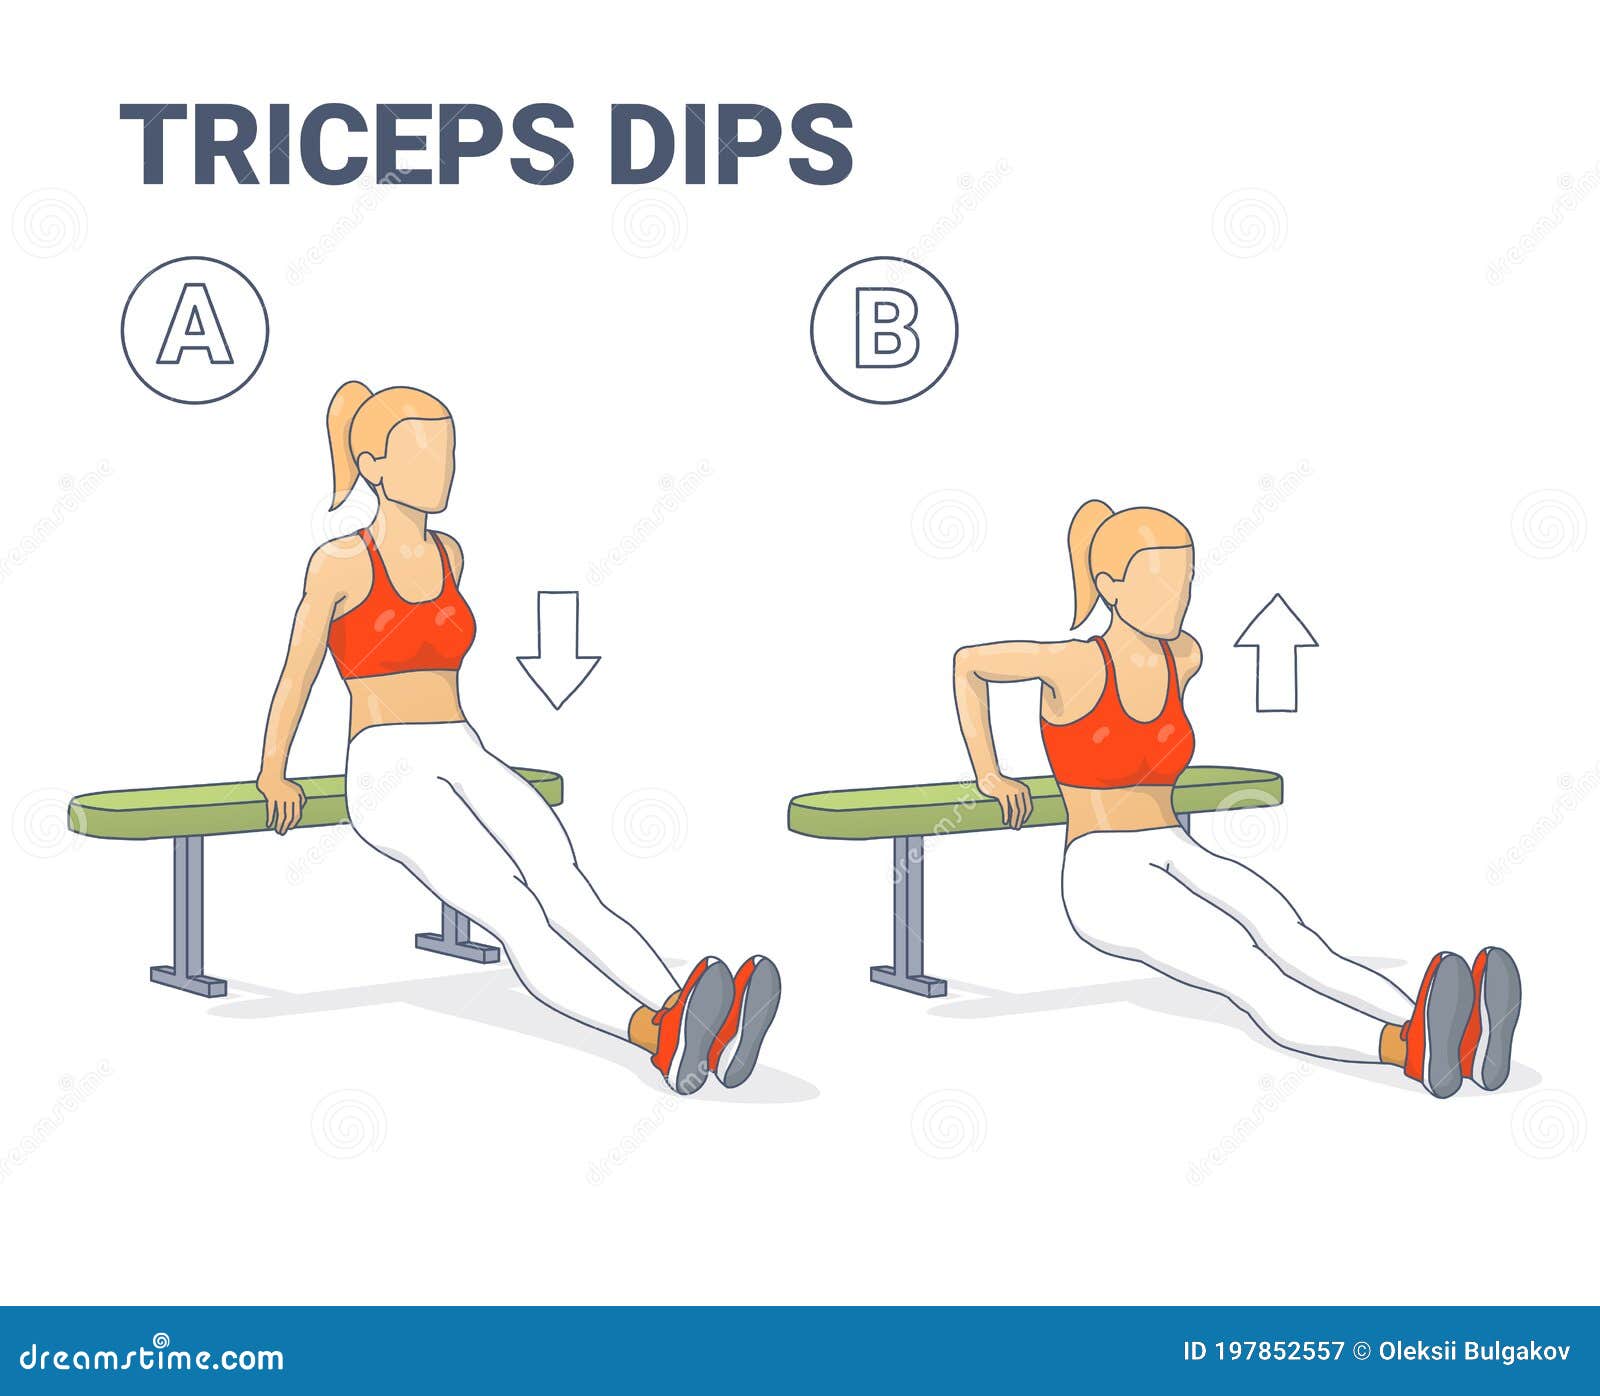 Tricep Dips  Illustrated Exercise Guide